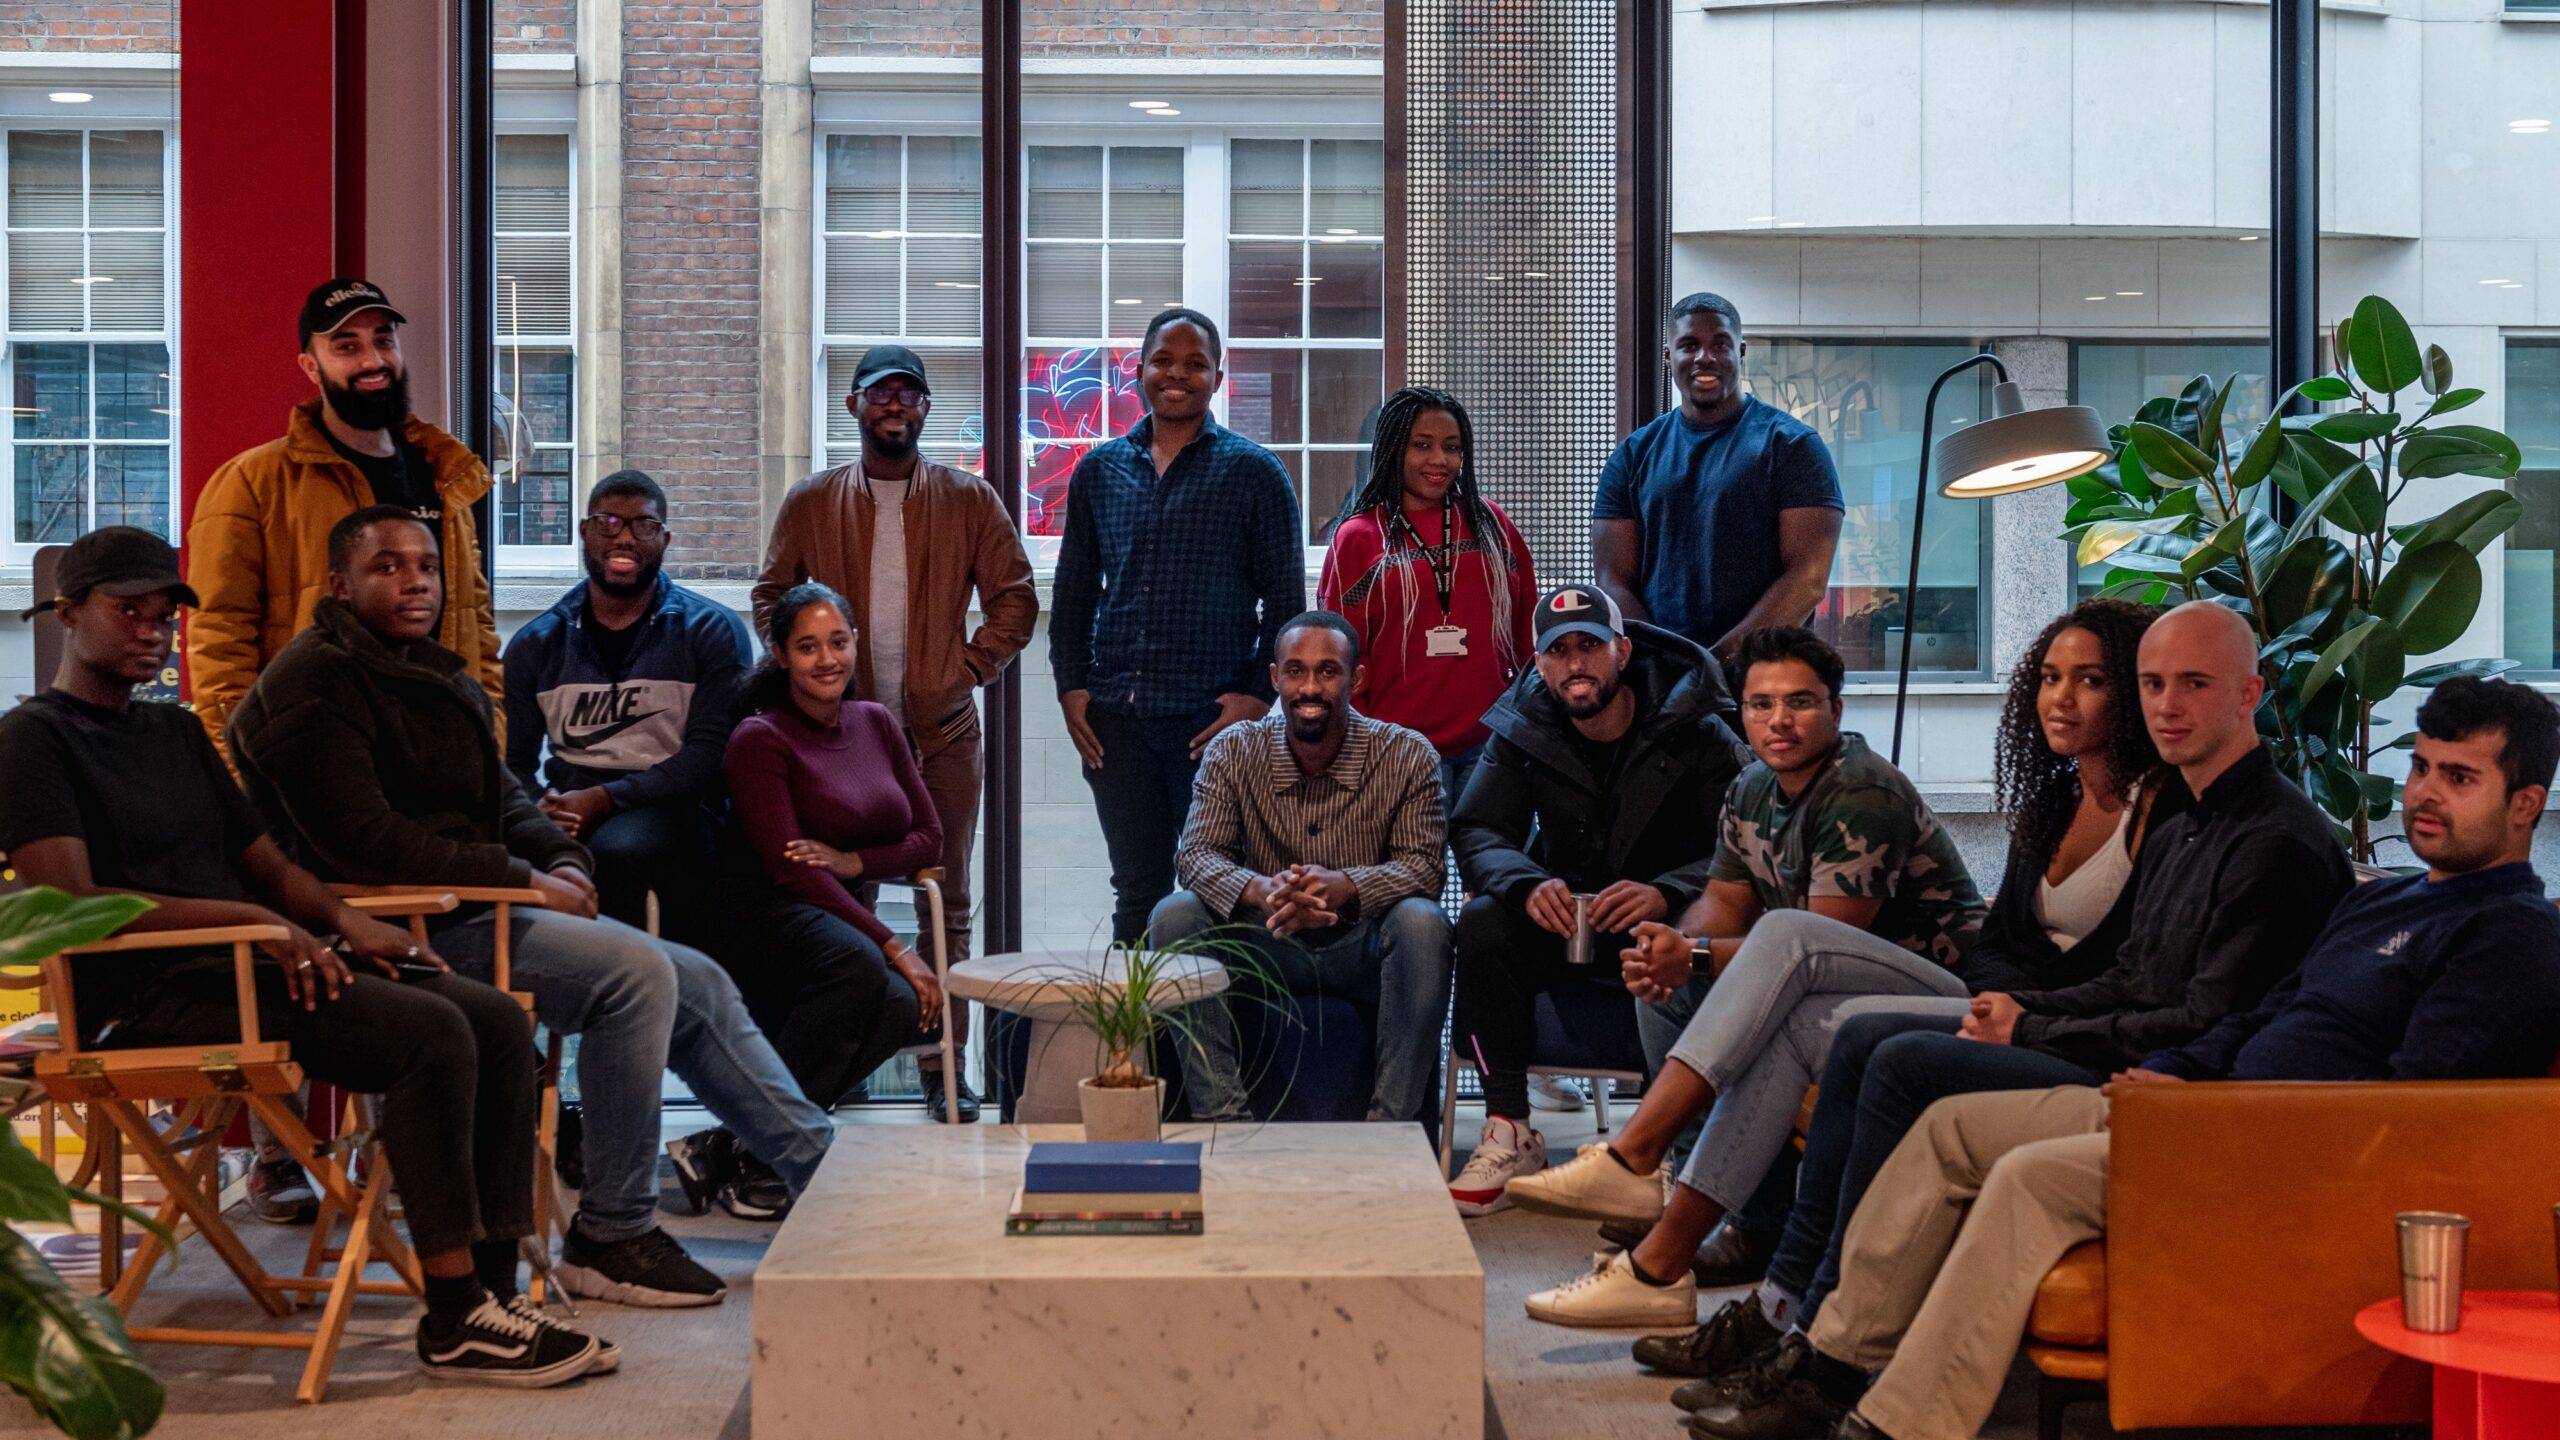 This startup community was set up to improve diversity in UK tech – and it’s getting results